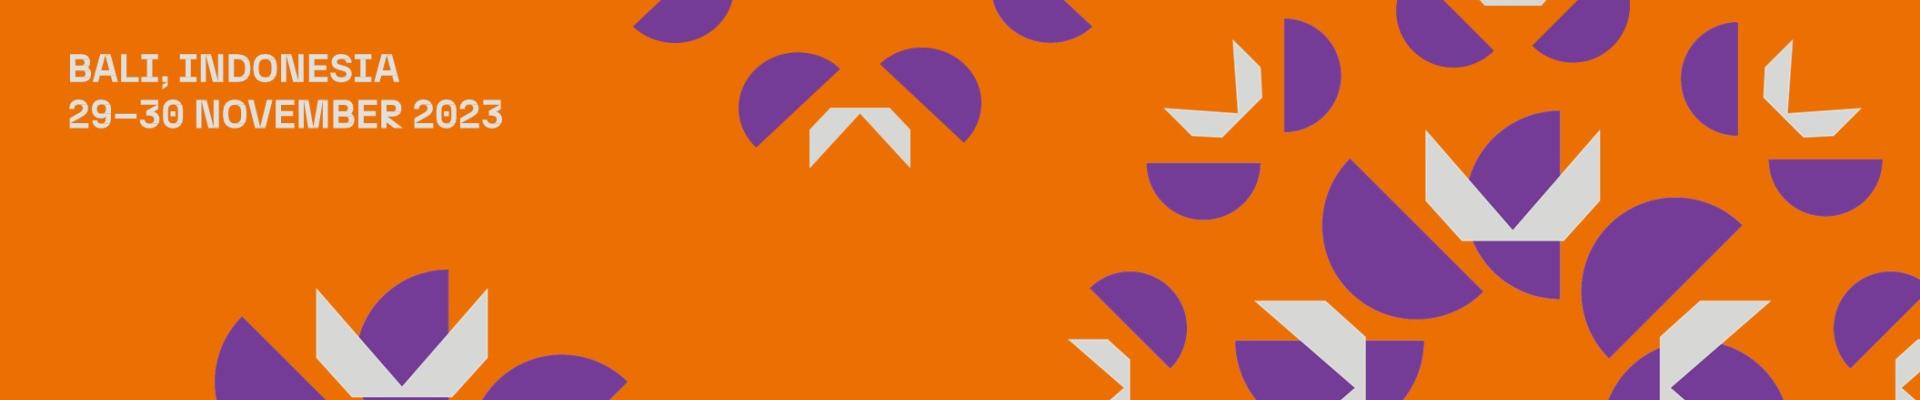 Text saying Democracy action partnership bali indonesia 29-30 November 2023 on an orange background with purple and grey floral shapes